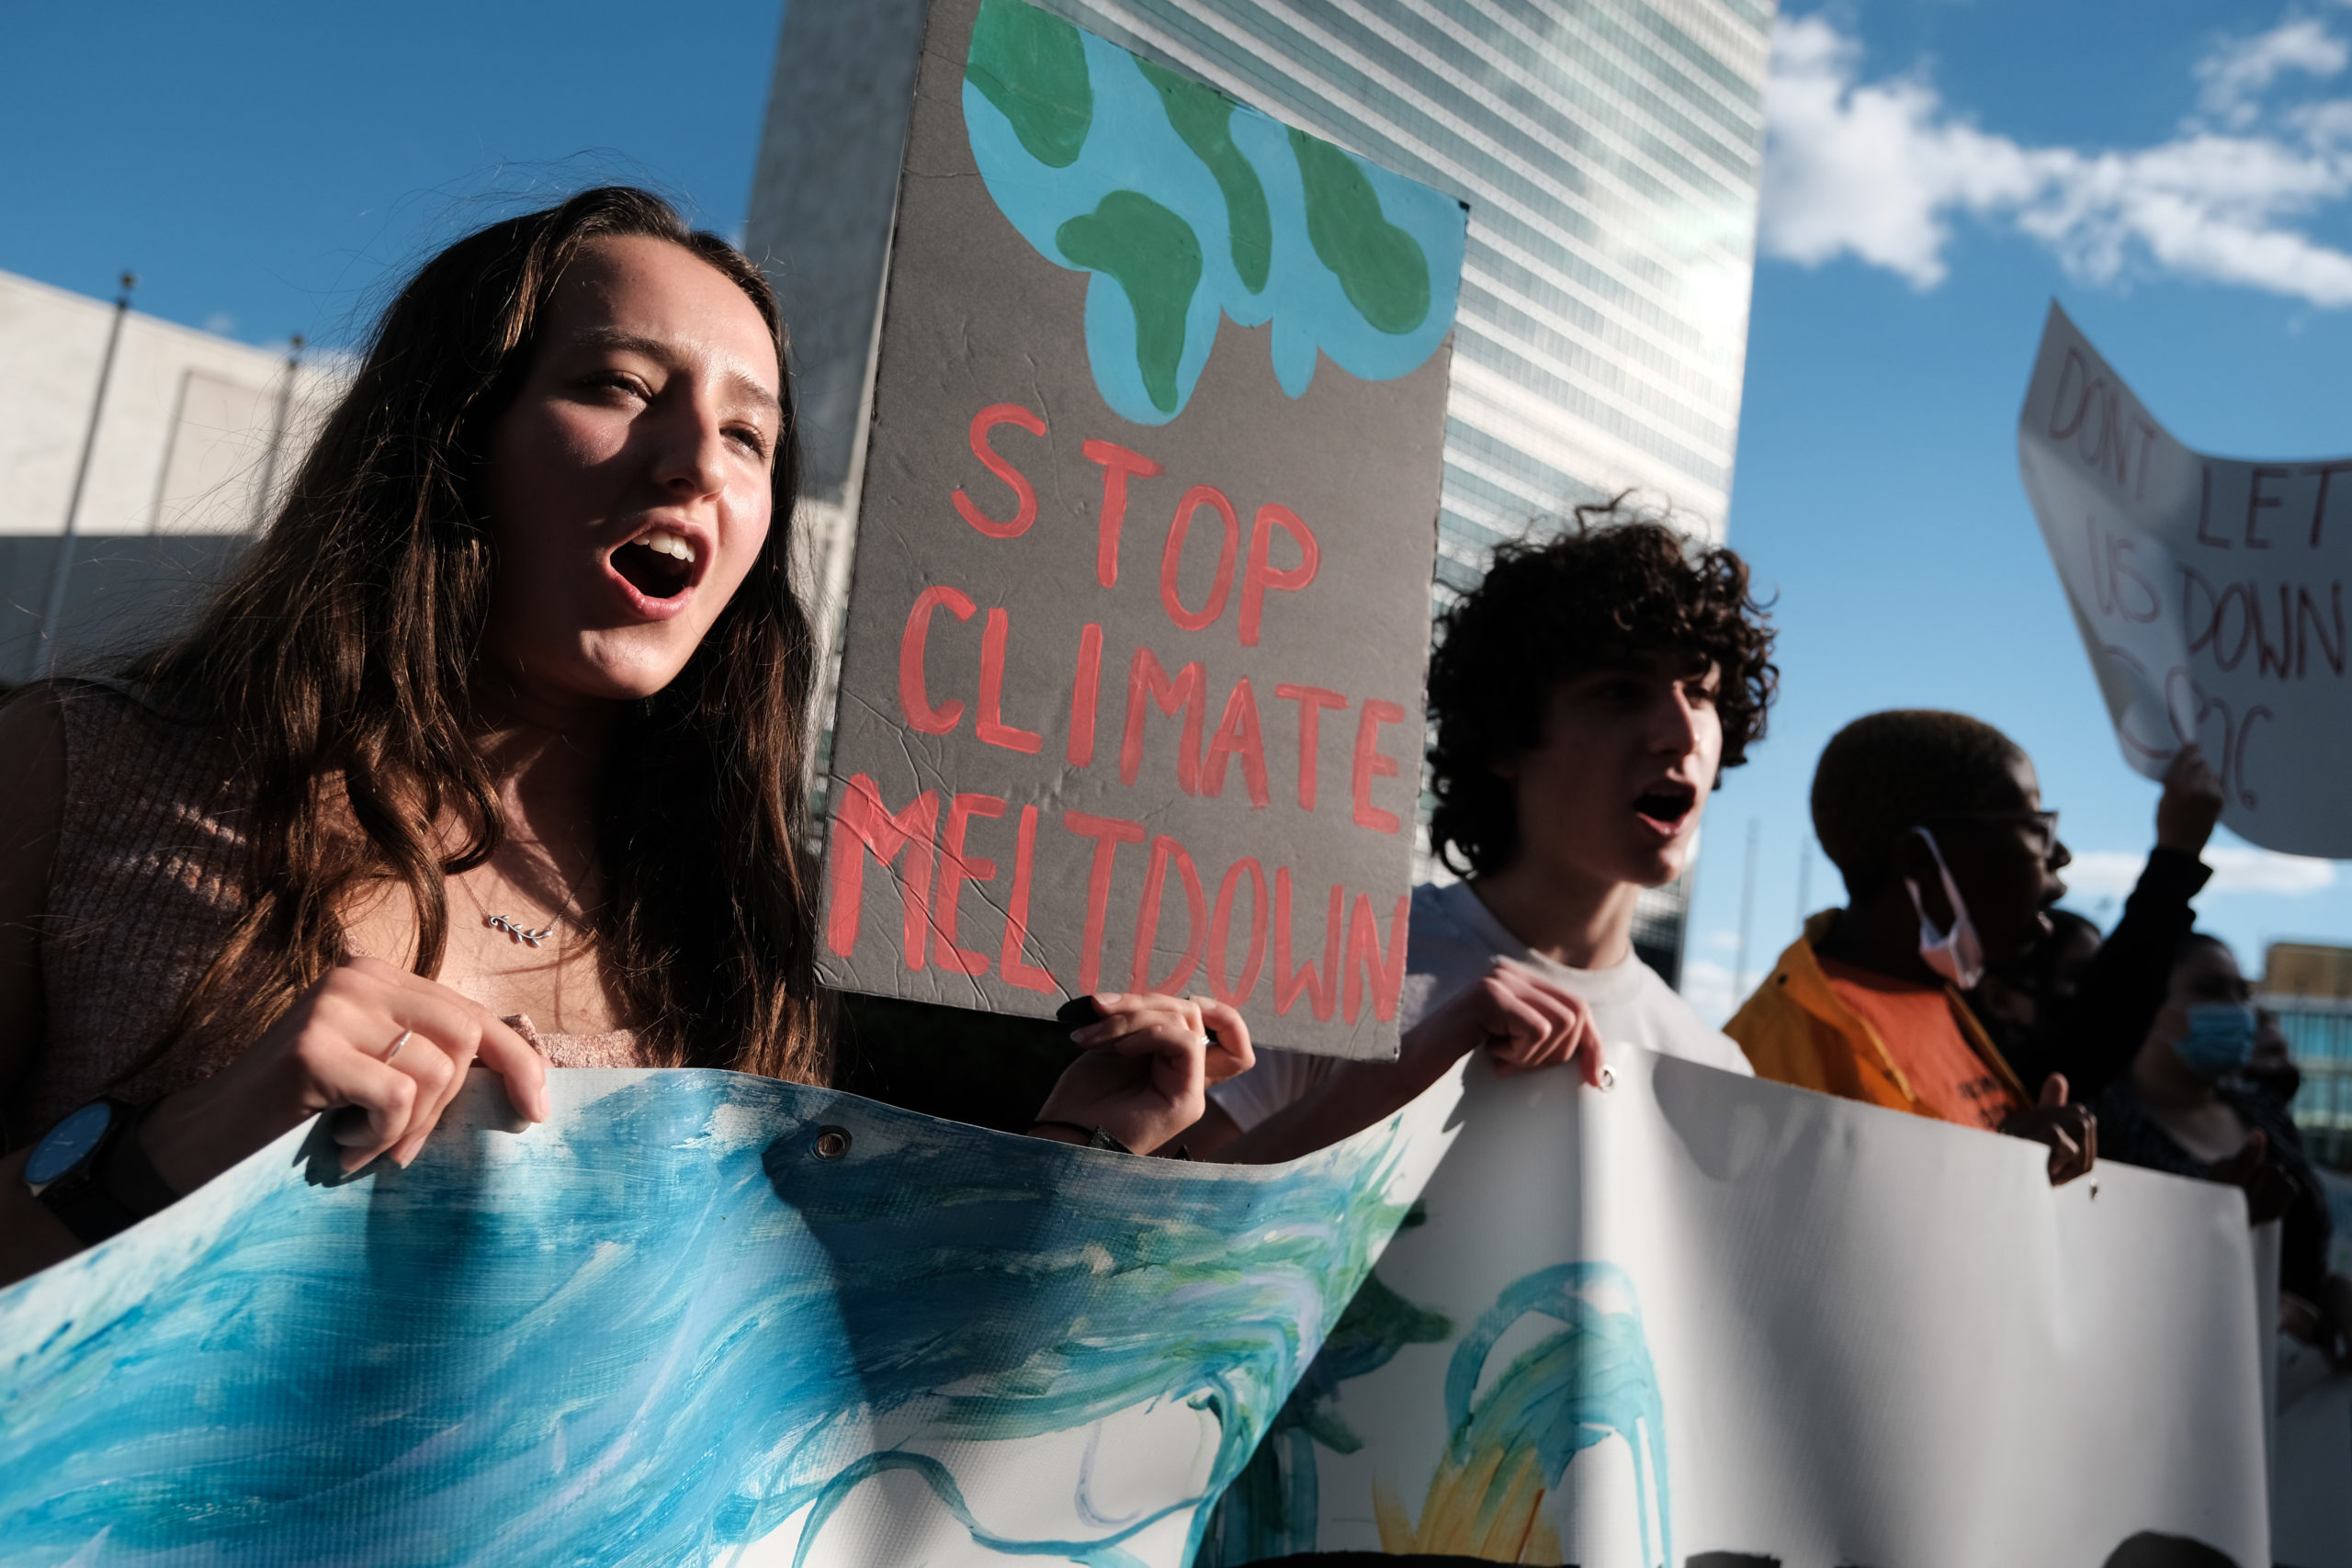 Climate activists protest in front of the United Nations building in New York City on Oct. 1. (Spencer Platt/Getty Images)